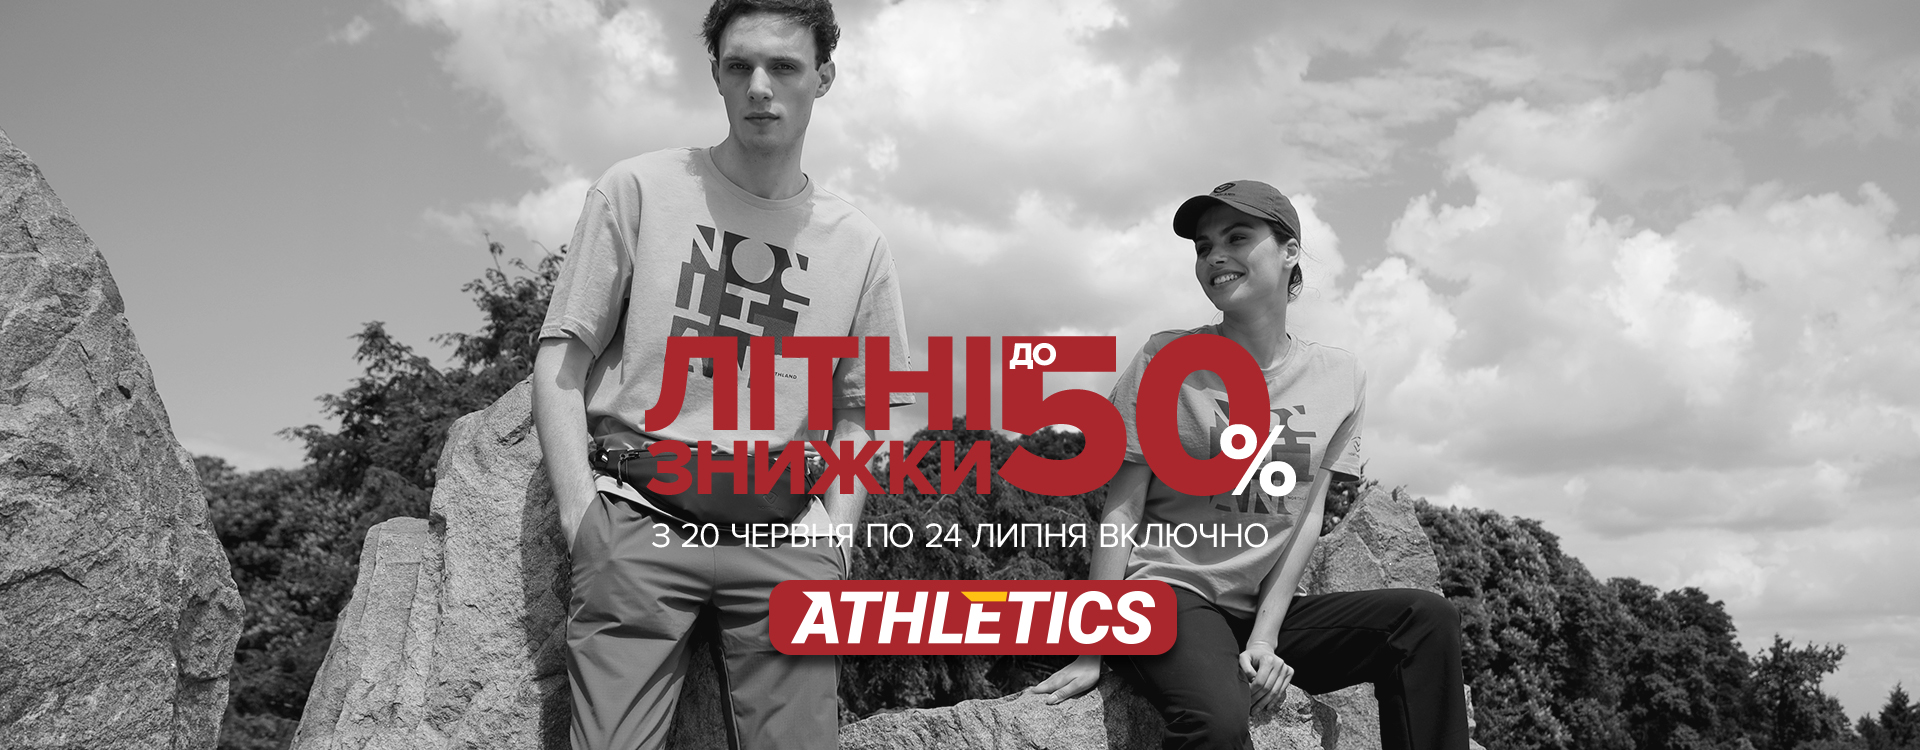 Summer discounts up to -50% from ATHLETICS